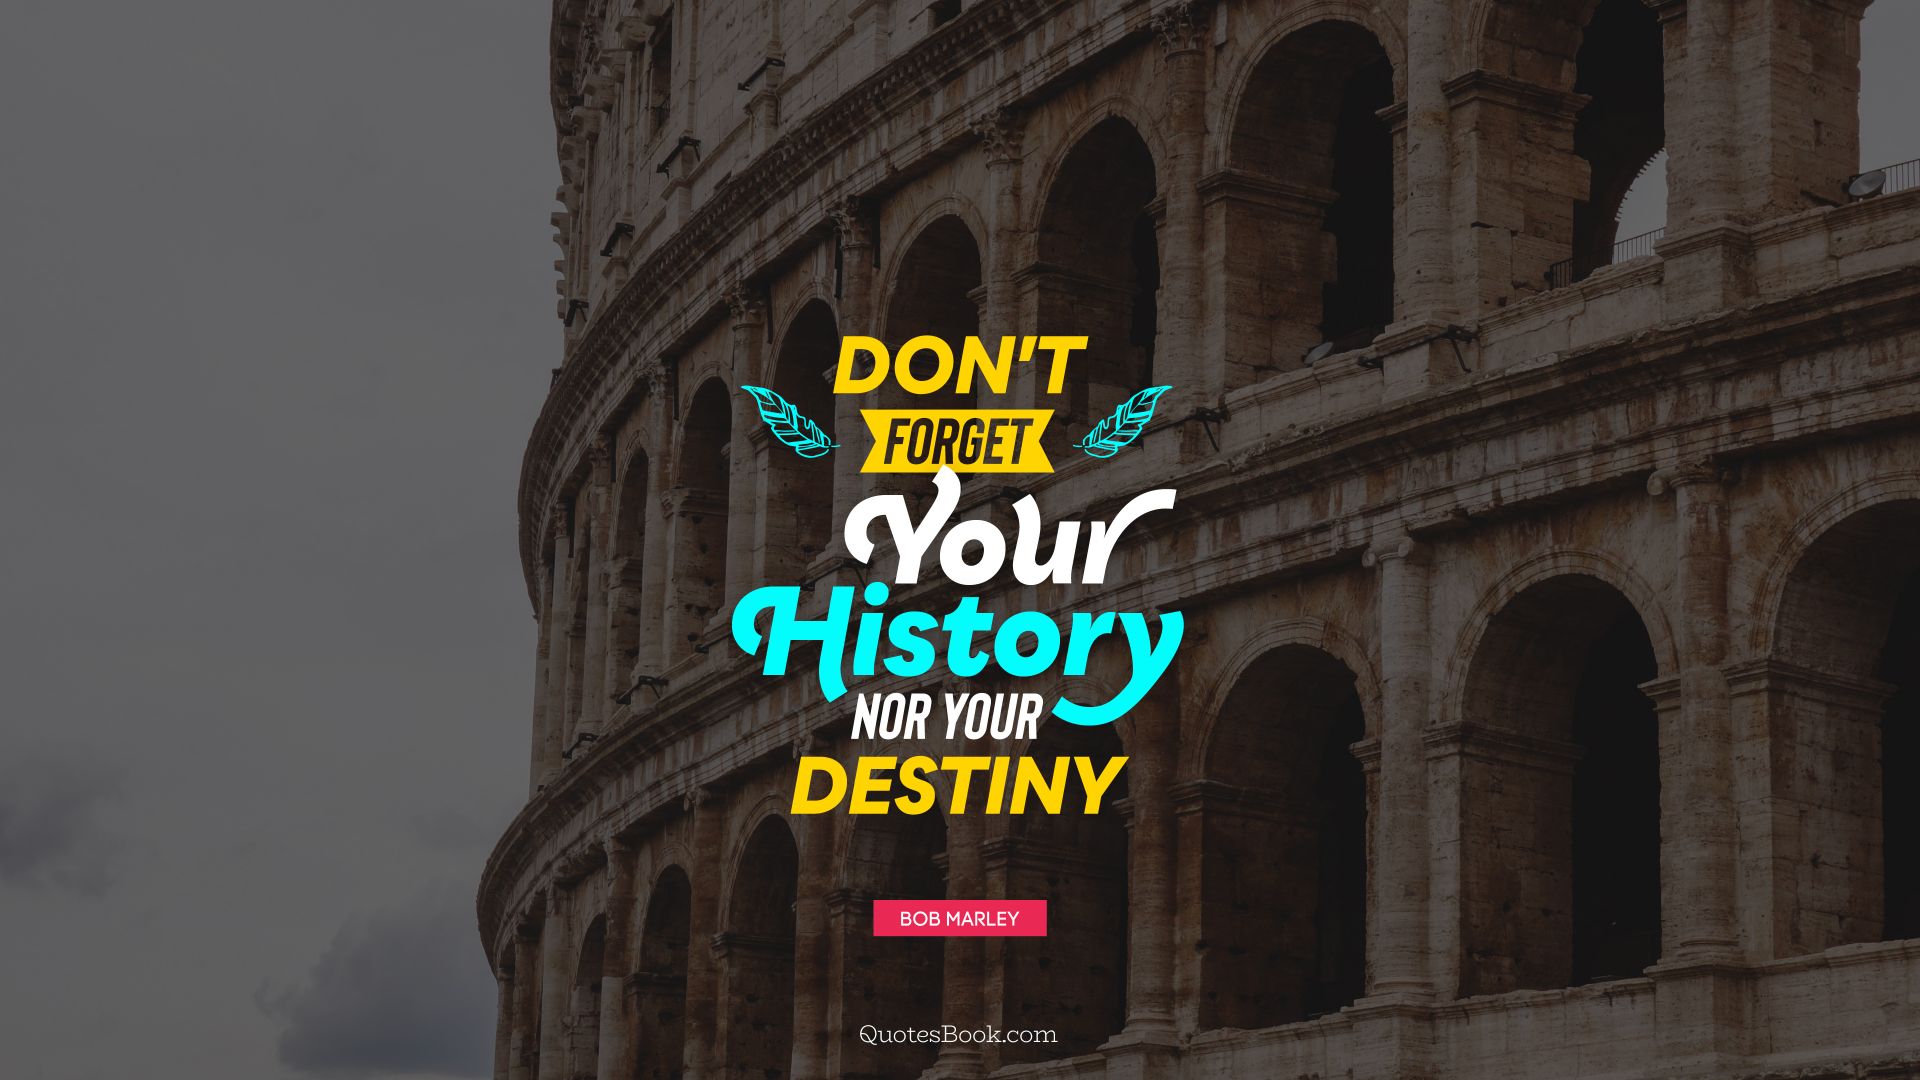 Don't forget your history nor your destiny. - Quote by Bob Marley